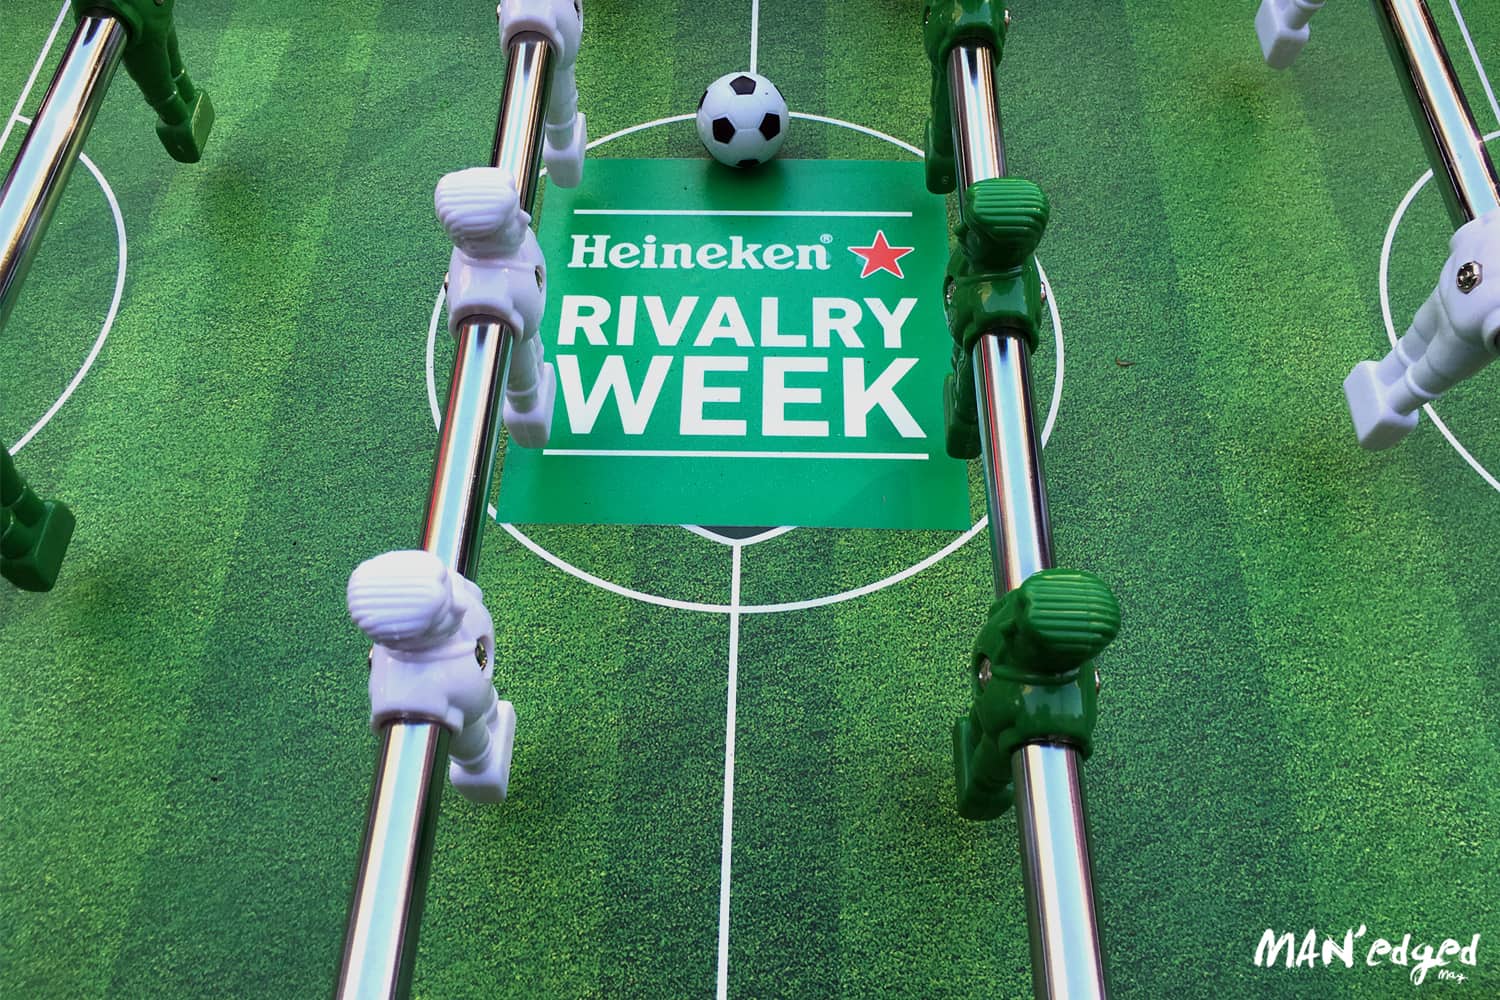 The Heineken and MLS Rivalry week launch featuring the New York Red Bulls and NYCFC